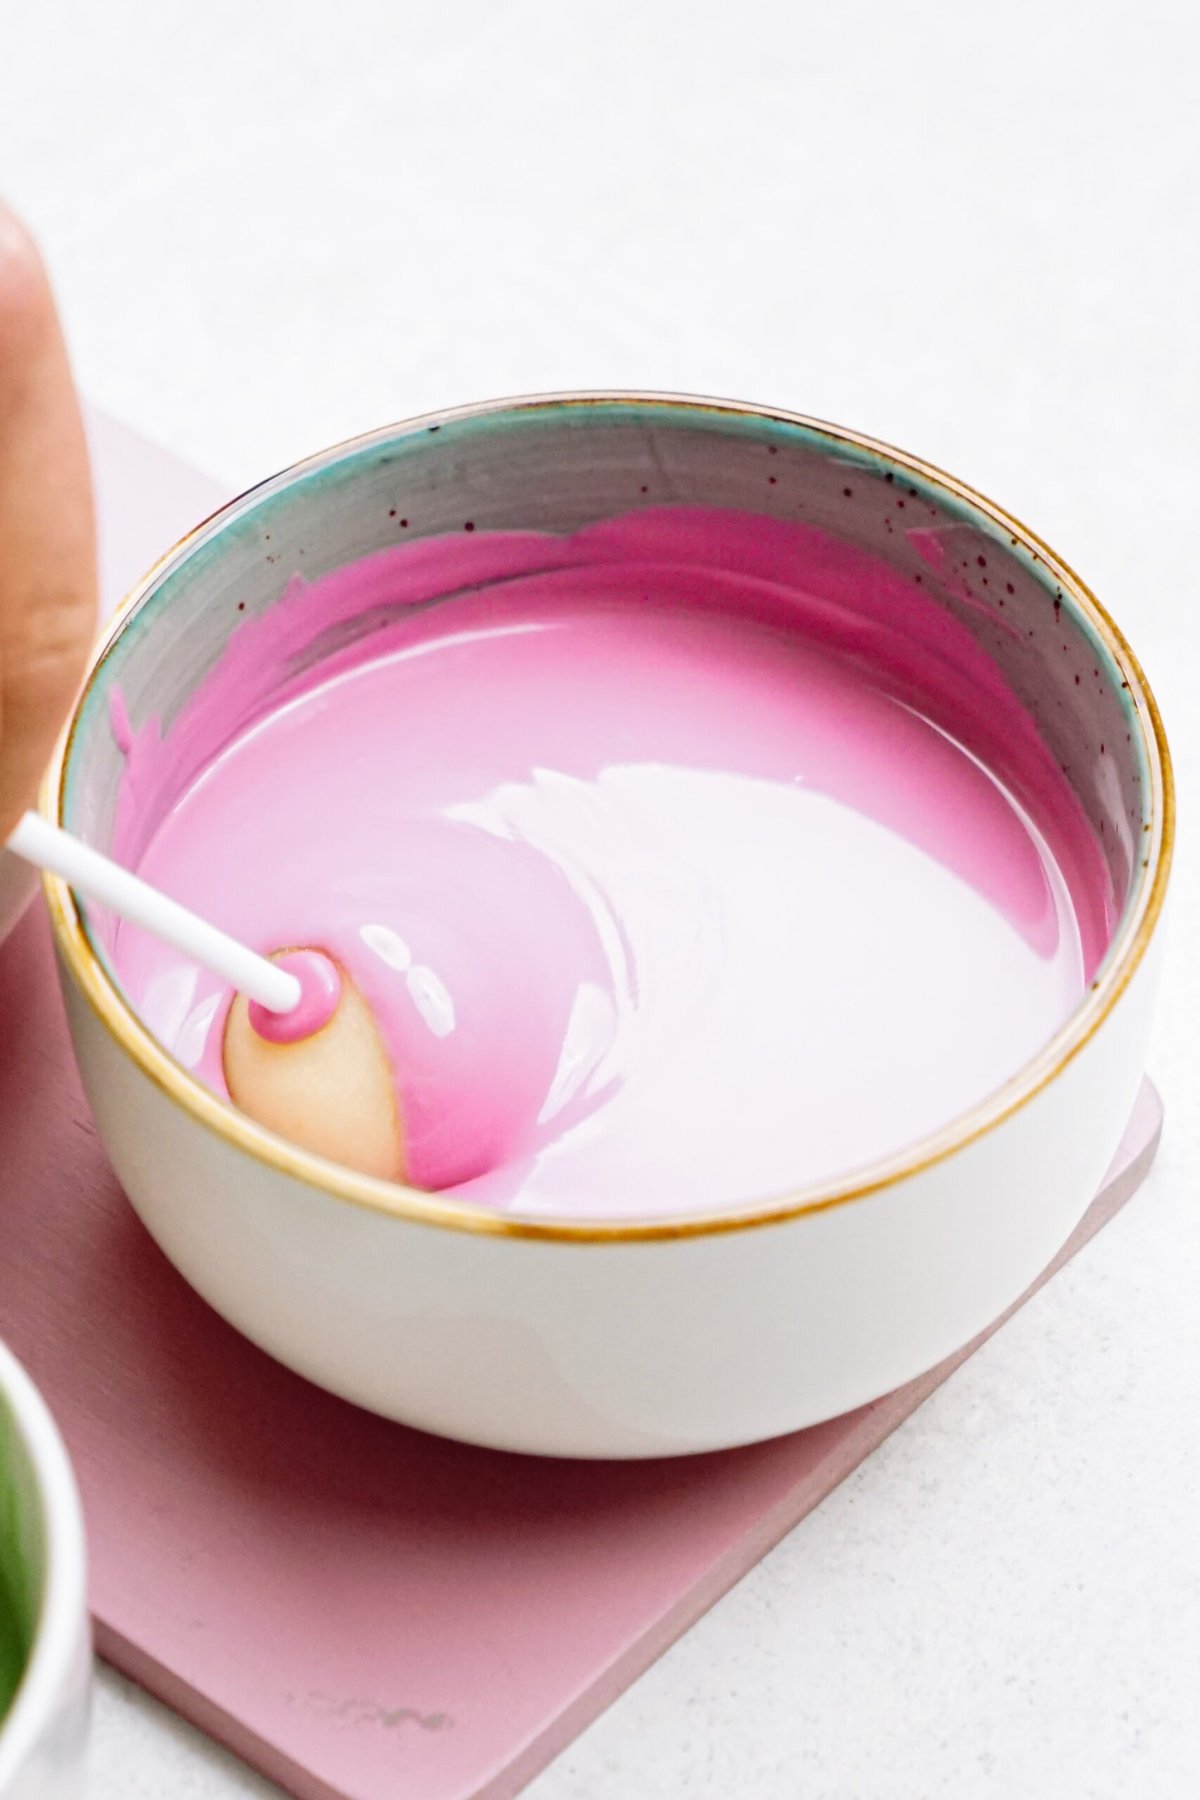 A hand dipping a cake pop into a bowl of pink icing.